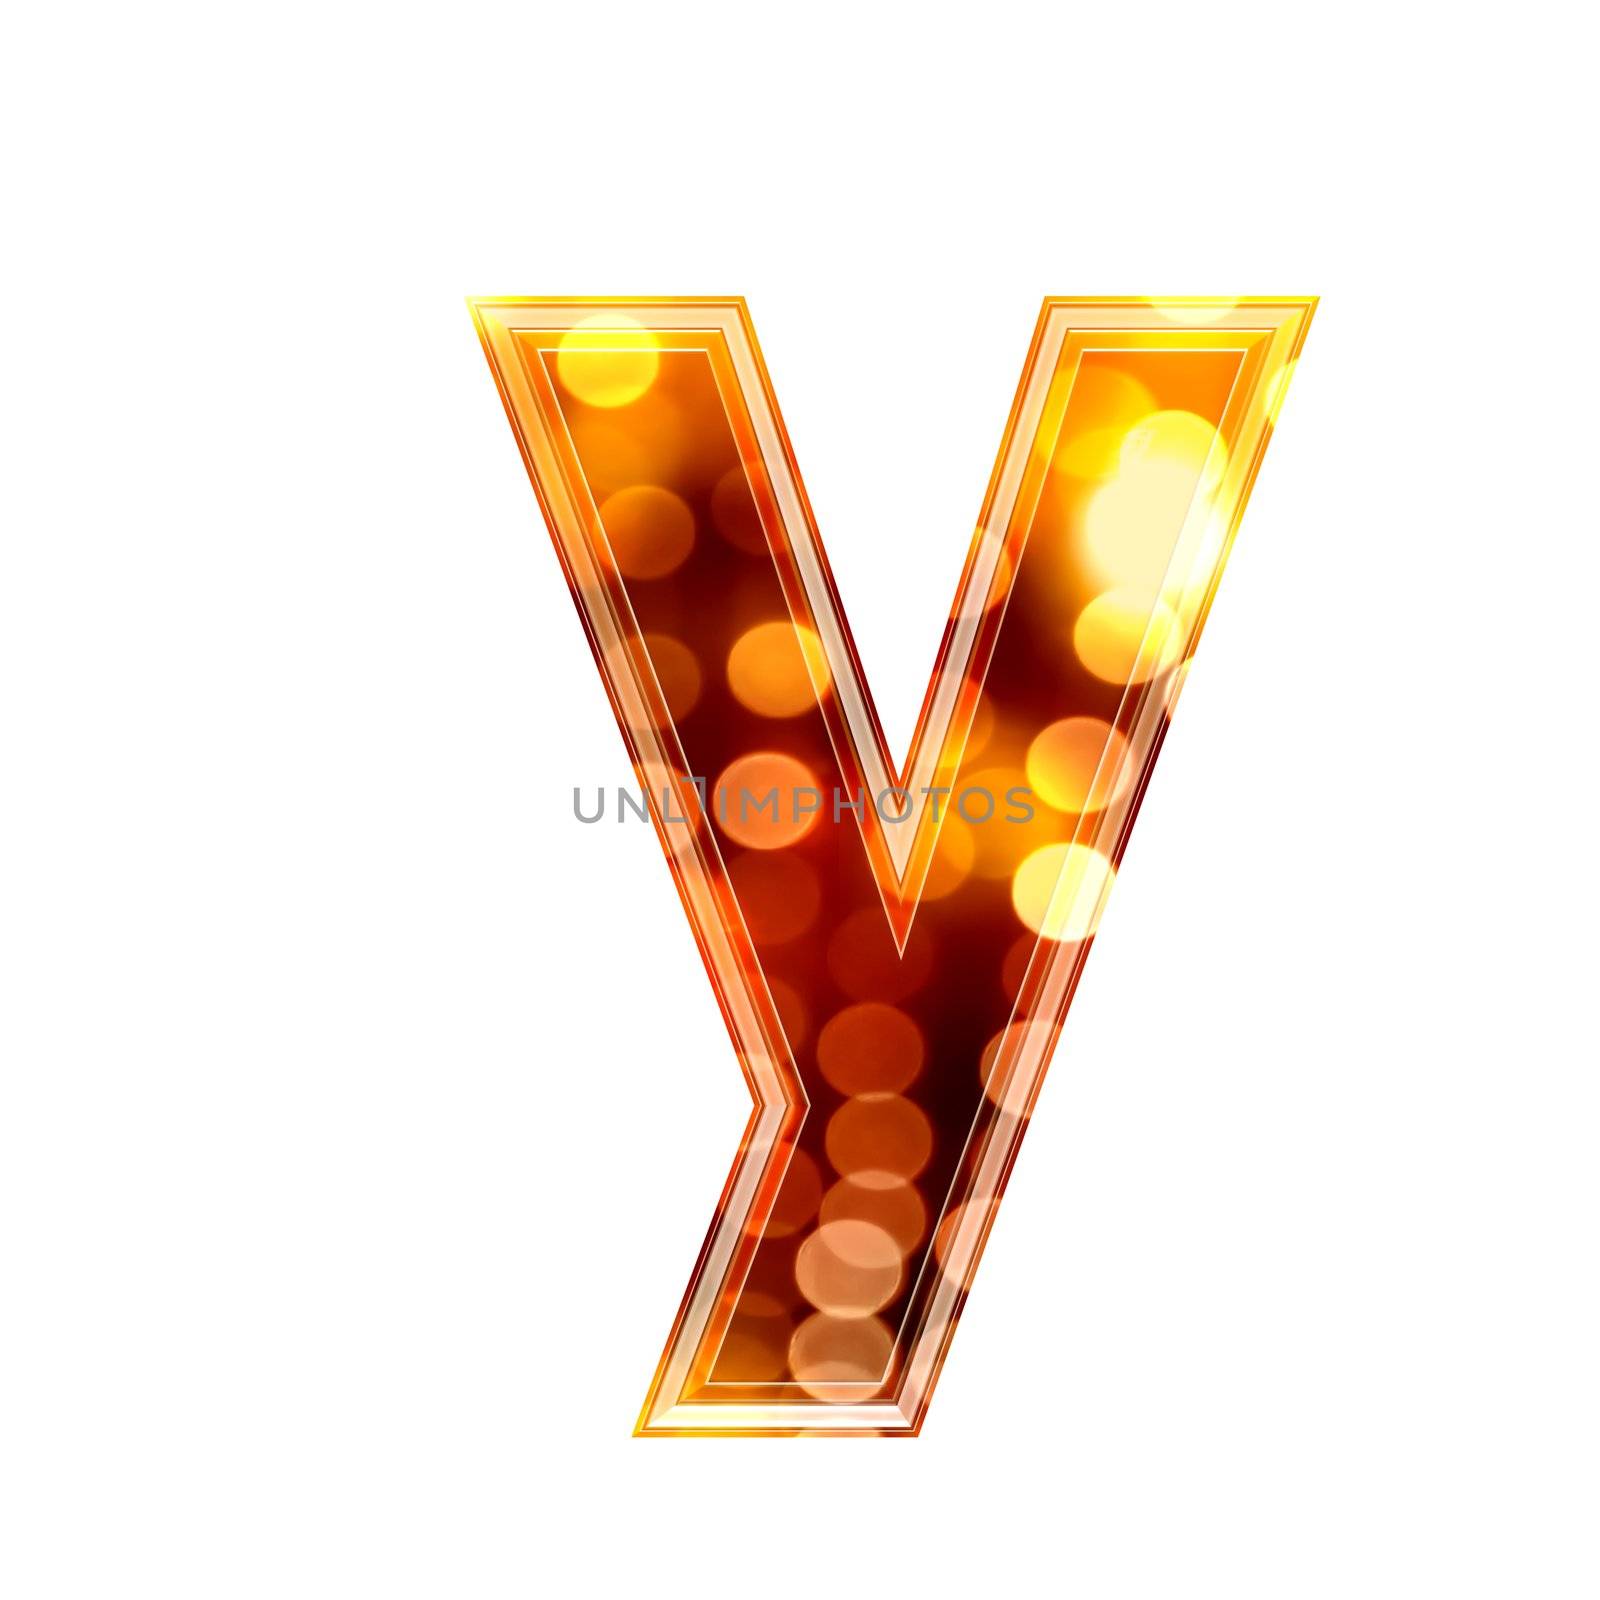 3d letter with glowing lights texture - y by chrisroll